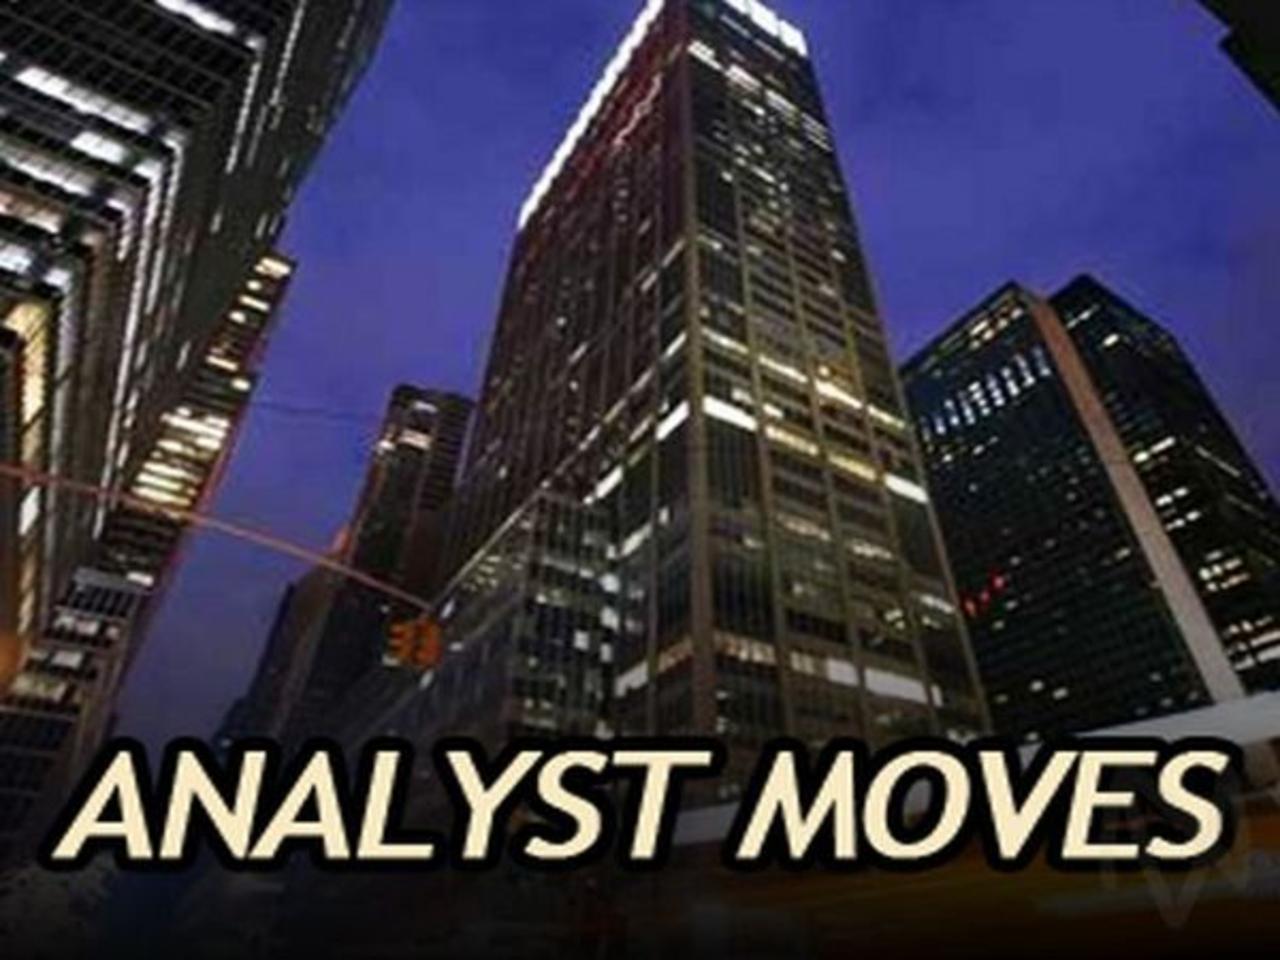 S&P 500 Analyst Moves: ENPH